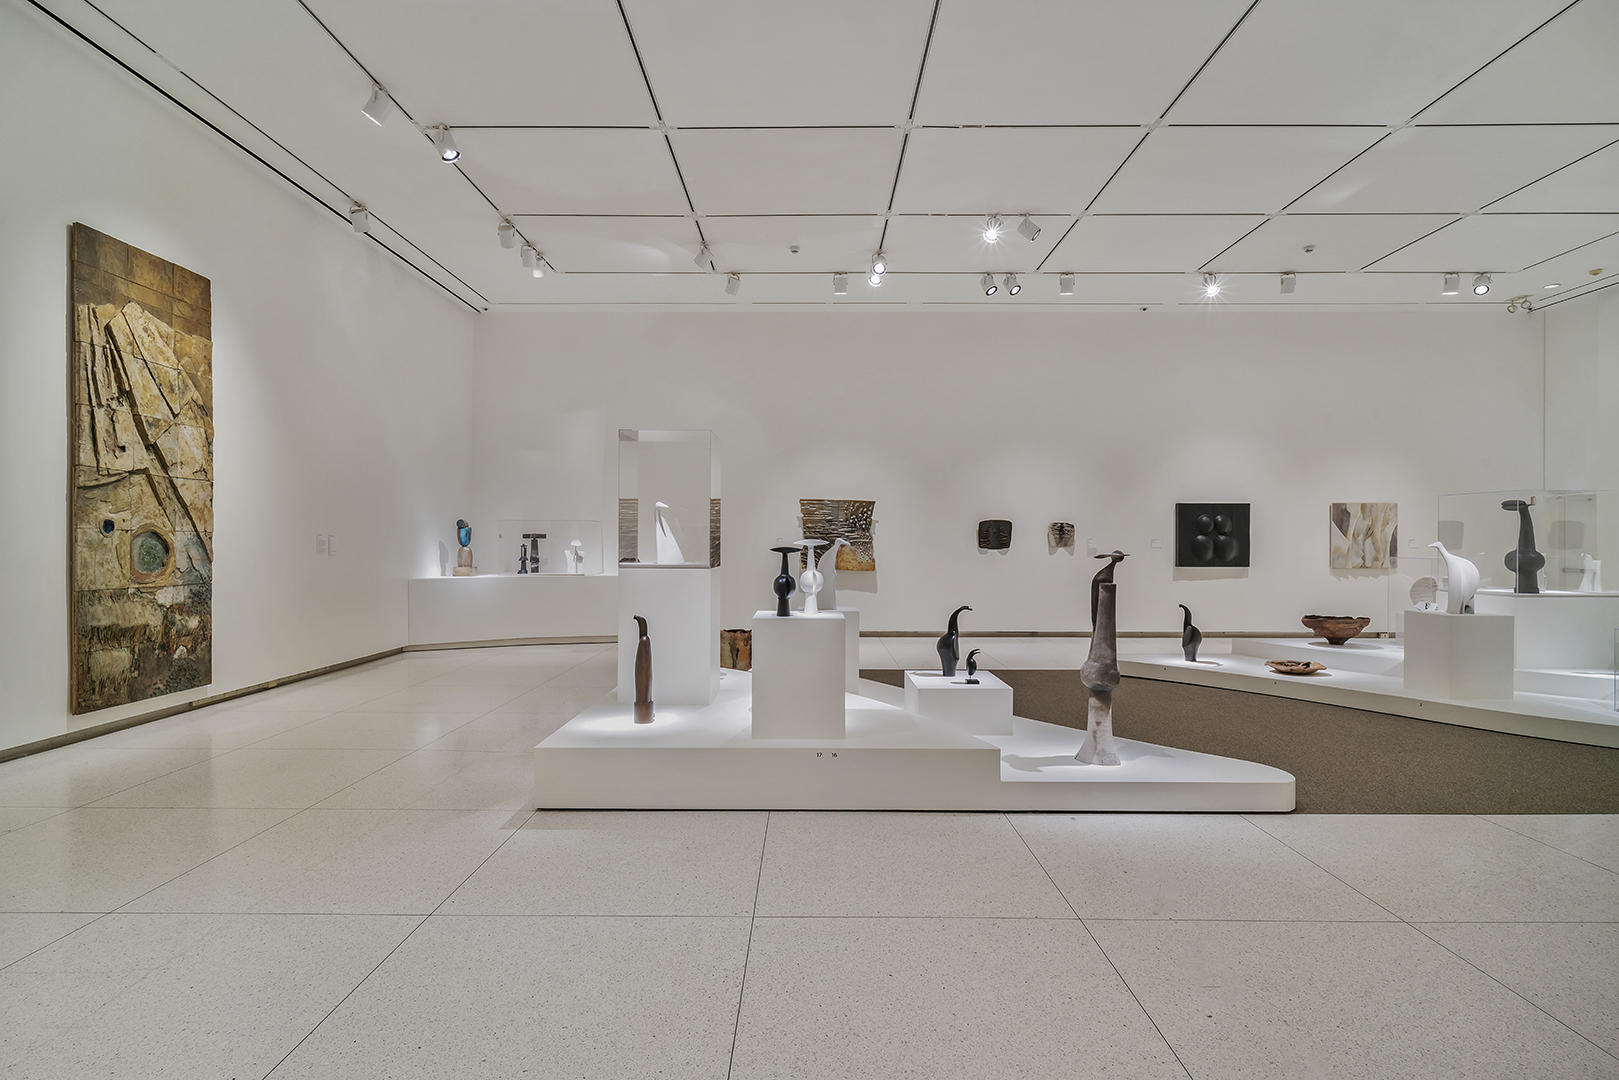 A wide view of a gallery showing a plinth with ceramic sculptures of various sizes and shapes